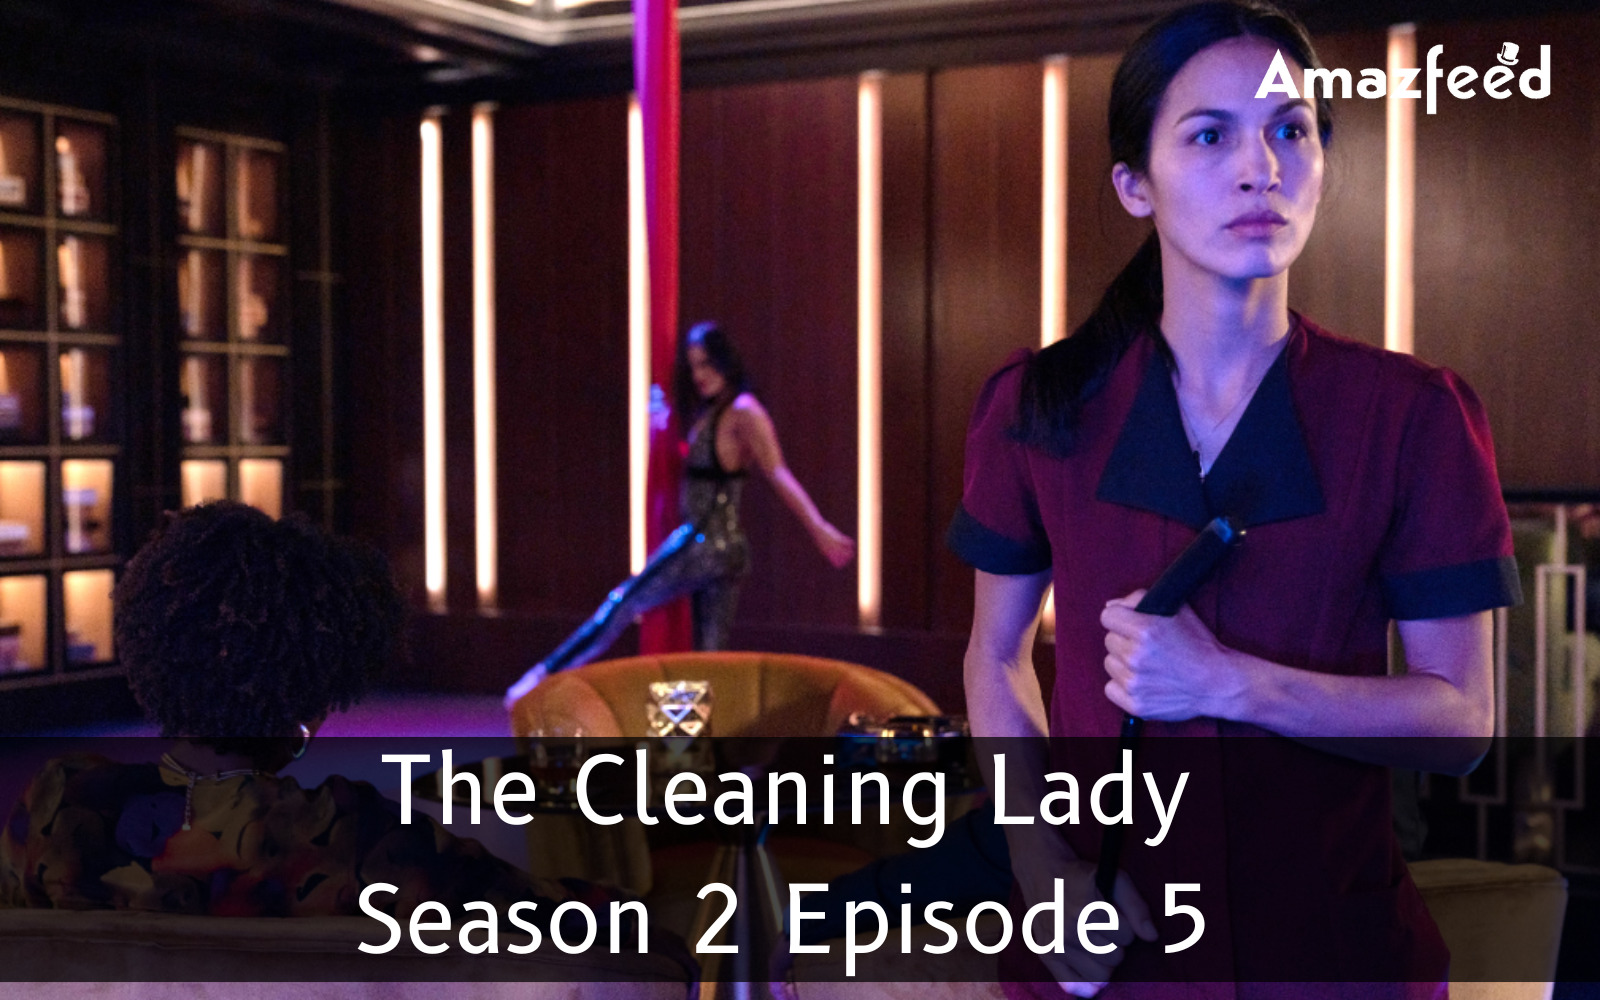 The Cleaning Lady Season 2 Episode 5 Release Date & Time